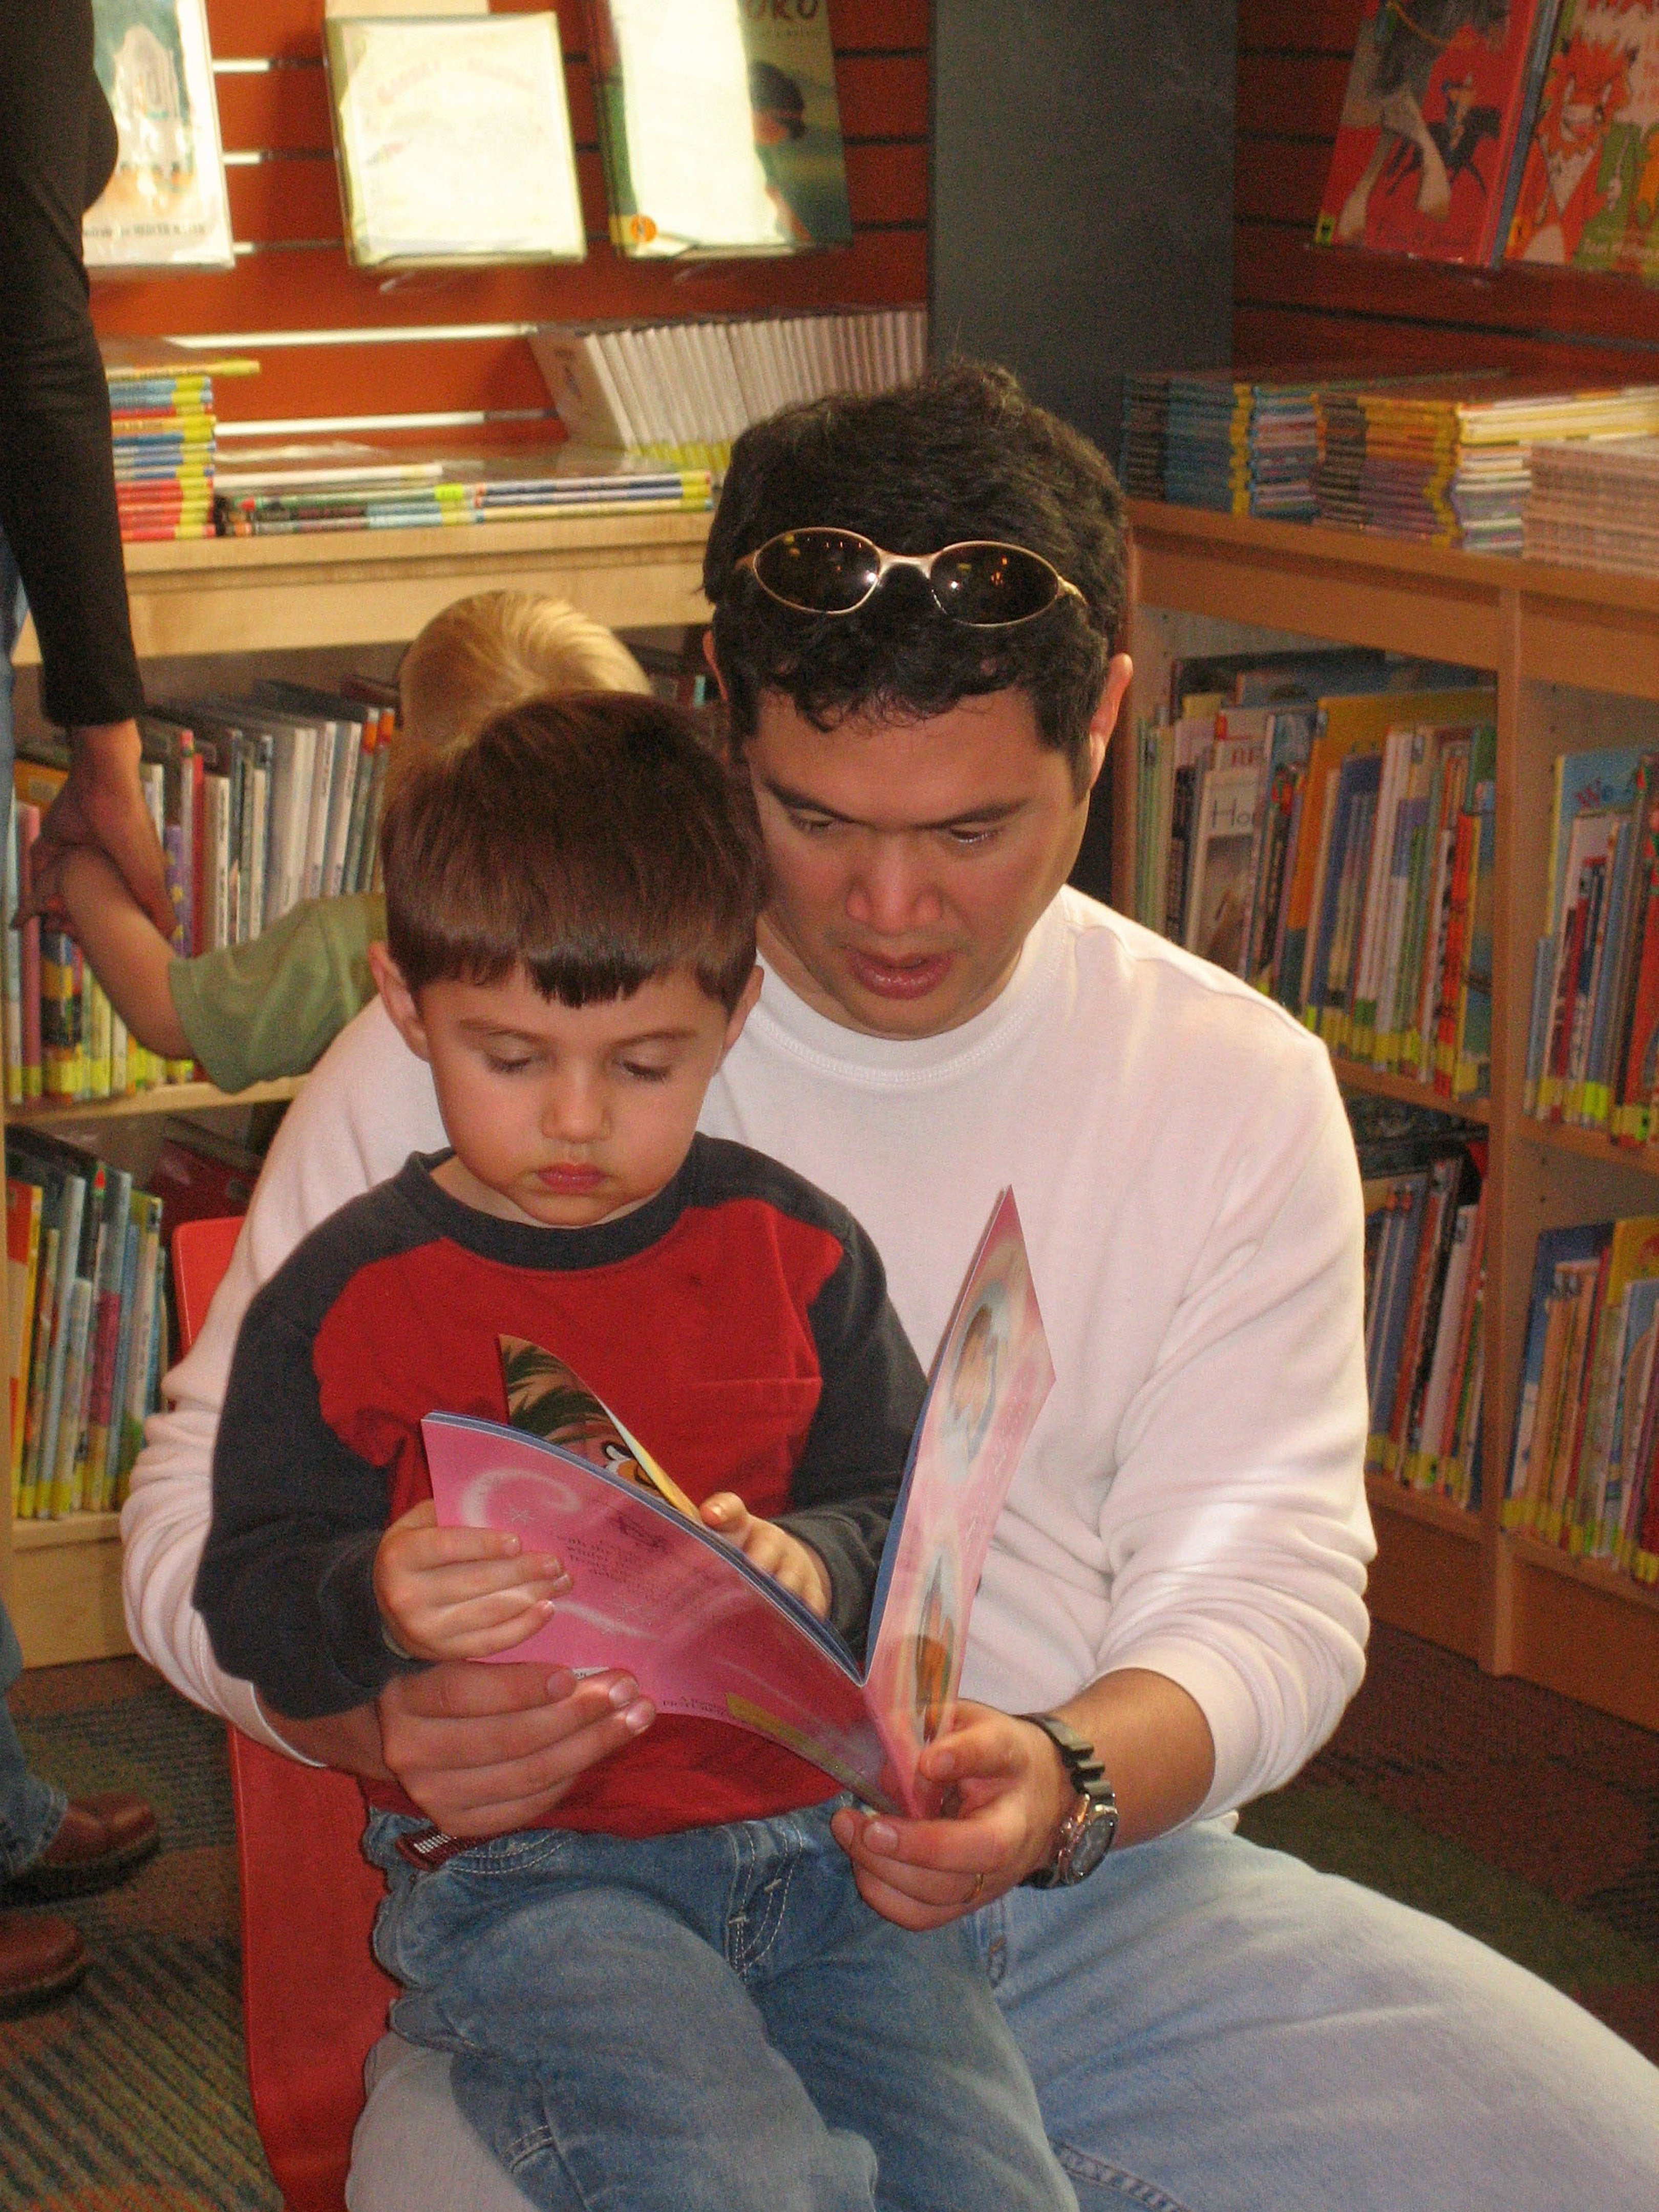 When children grow up to love reading, may have been influenced by the positive experiences of being read to in their families.^[[Image](https://www.flickr.com/photos/sanjoselibrary/2925237508) by [San José Public Library](https://www.flickr.com/photos/sanjoselibrary/) is licensed under [CC BY-SA 2.0](https://creativecommons.org/licenses/by-sa/2.0/)]